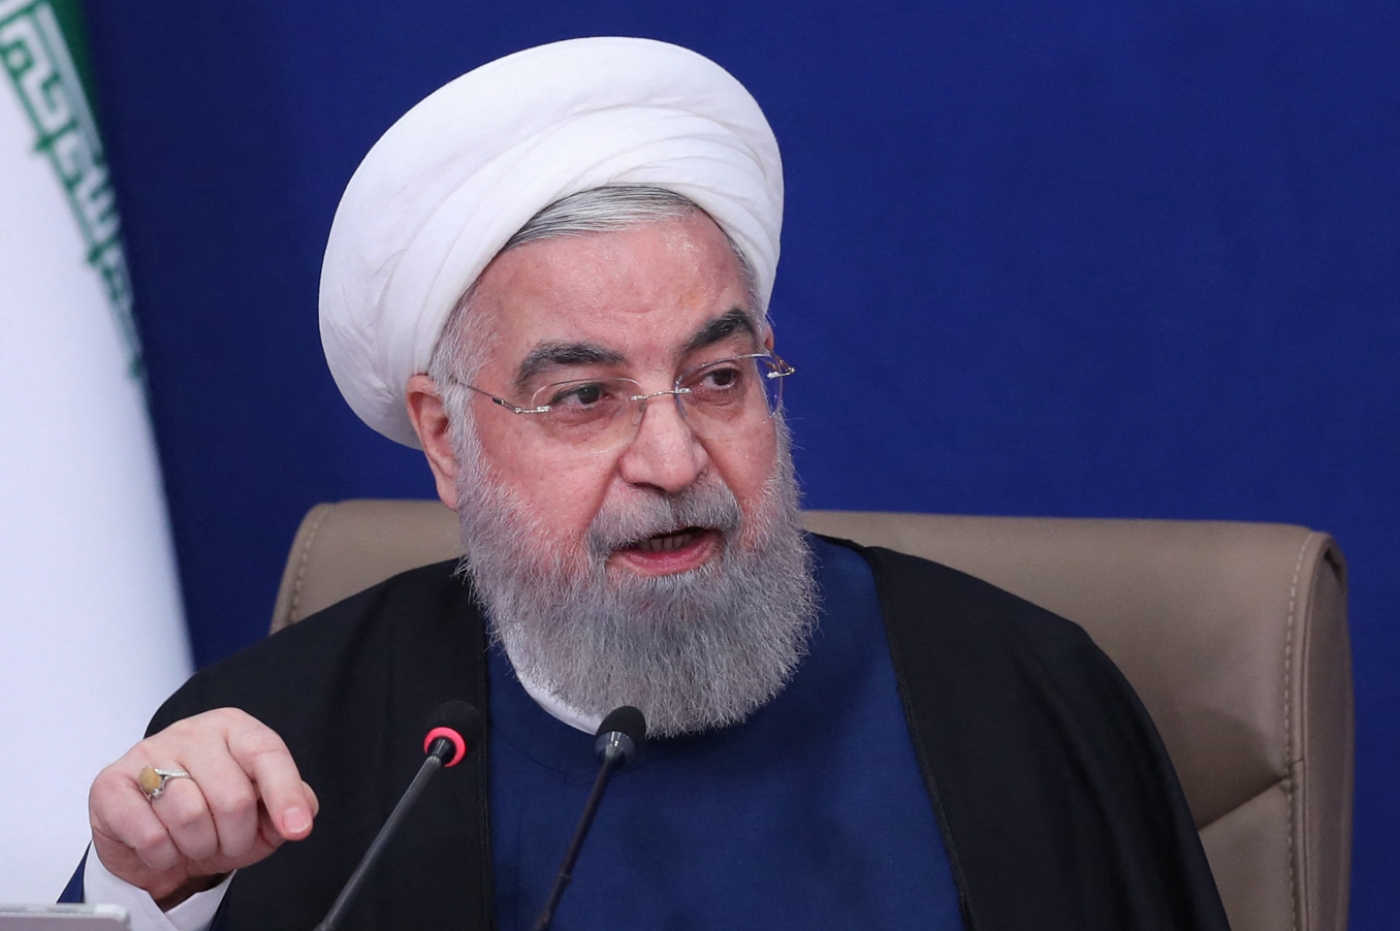 Iran's President Hassan Rouhani ordered a probe into who leaked the "stolen" recording of Zarif .